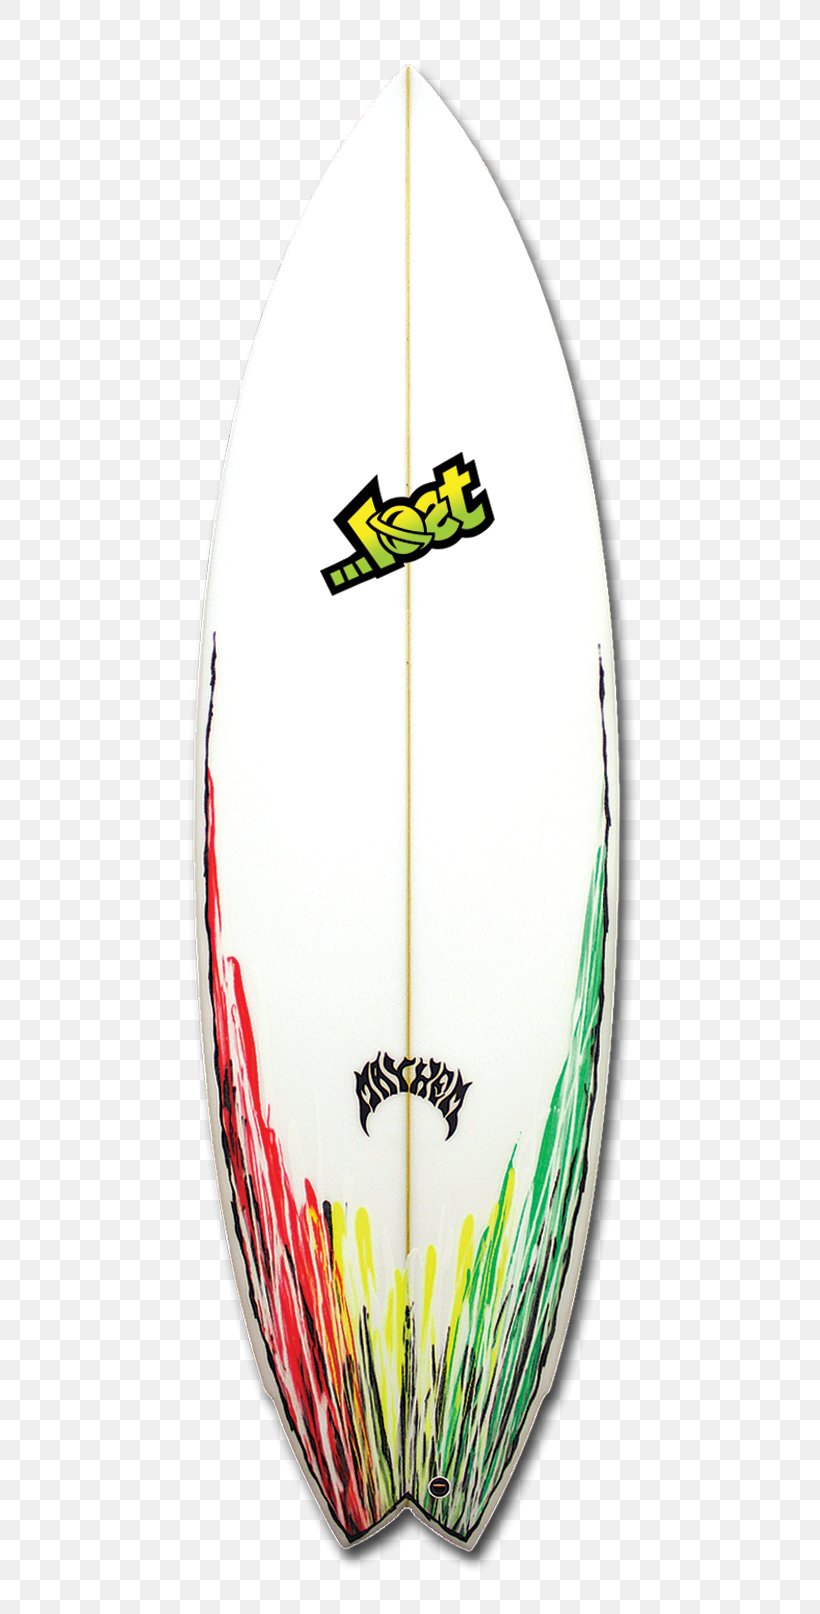 Lost Surfboards Surfing Action Sport Drives Lost Bottom Feeder 16GB USB 2.0 Flash Drive Lib Technologies, PNG, 600x1614px, Surfboard, Bottom Feeder, Lib Technologies, Lost Surfboards, Plank Download Free